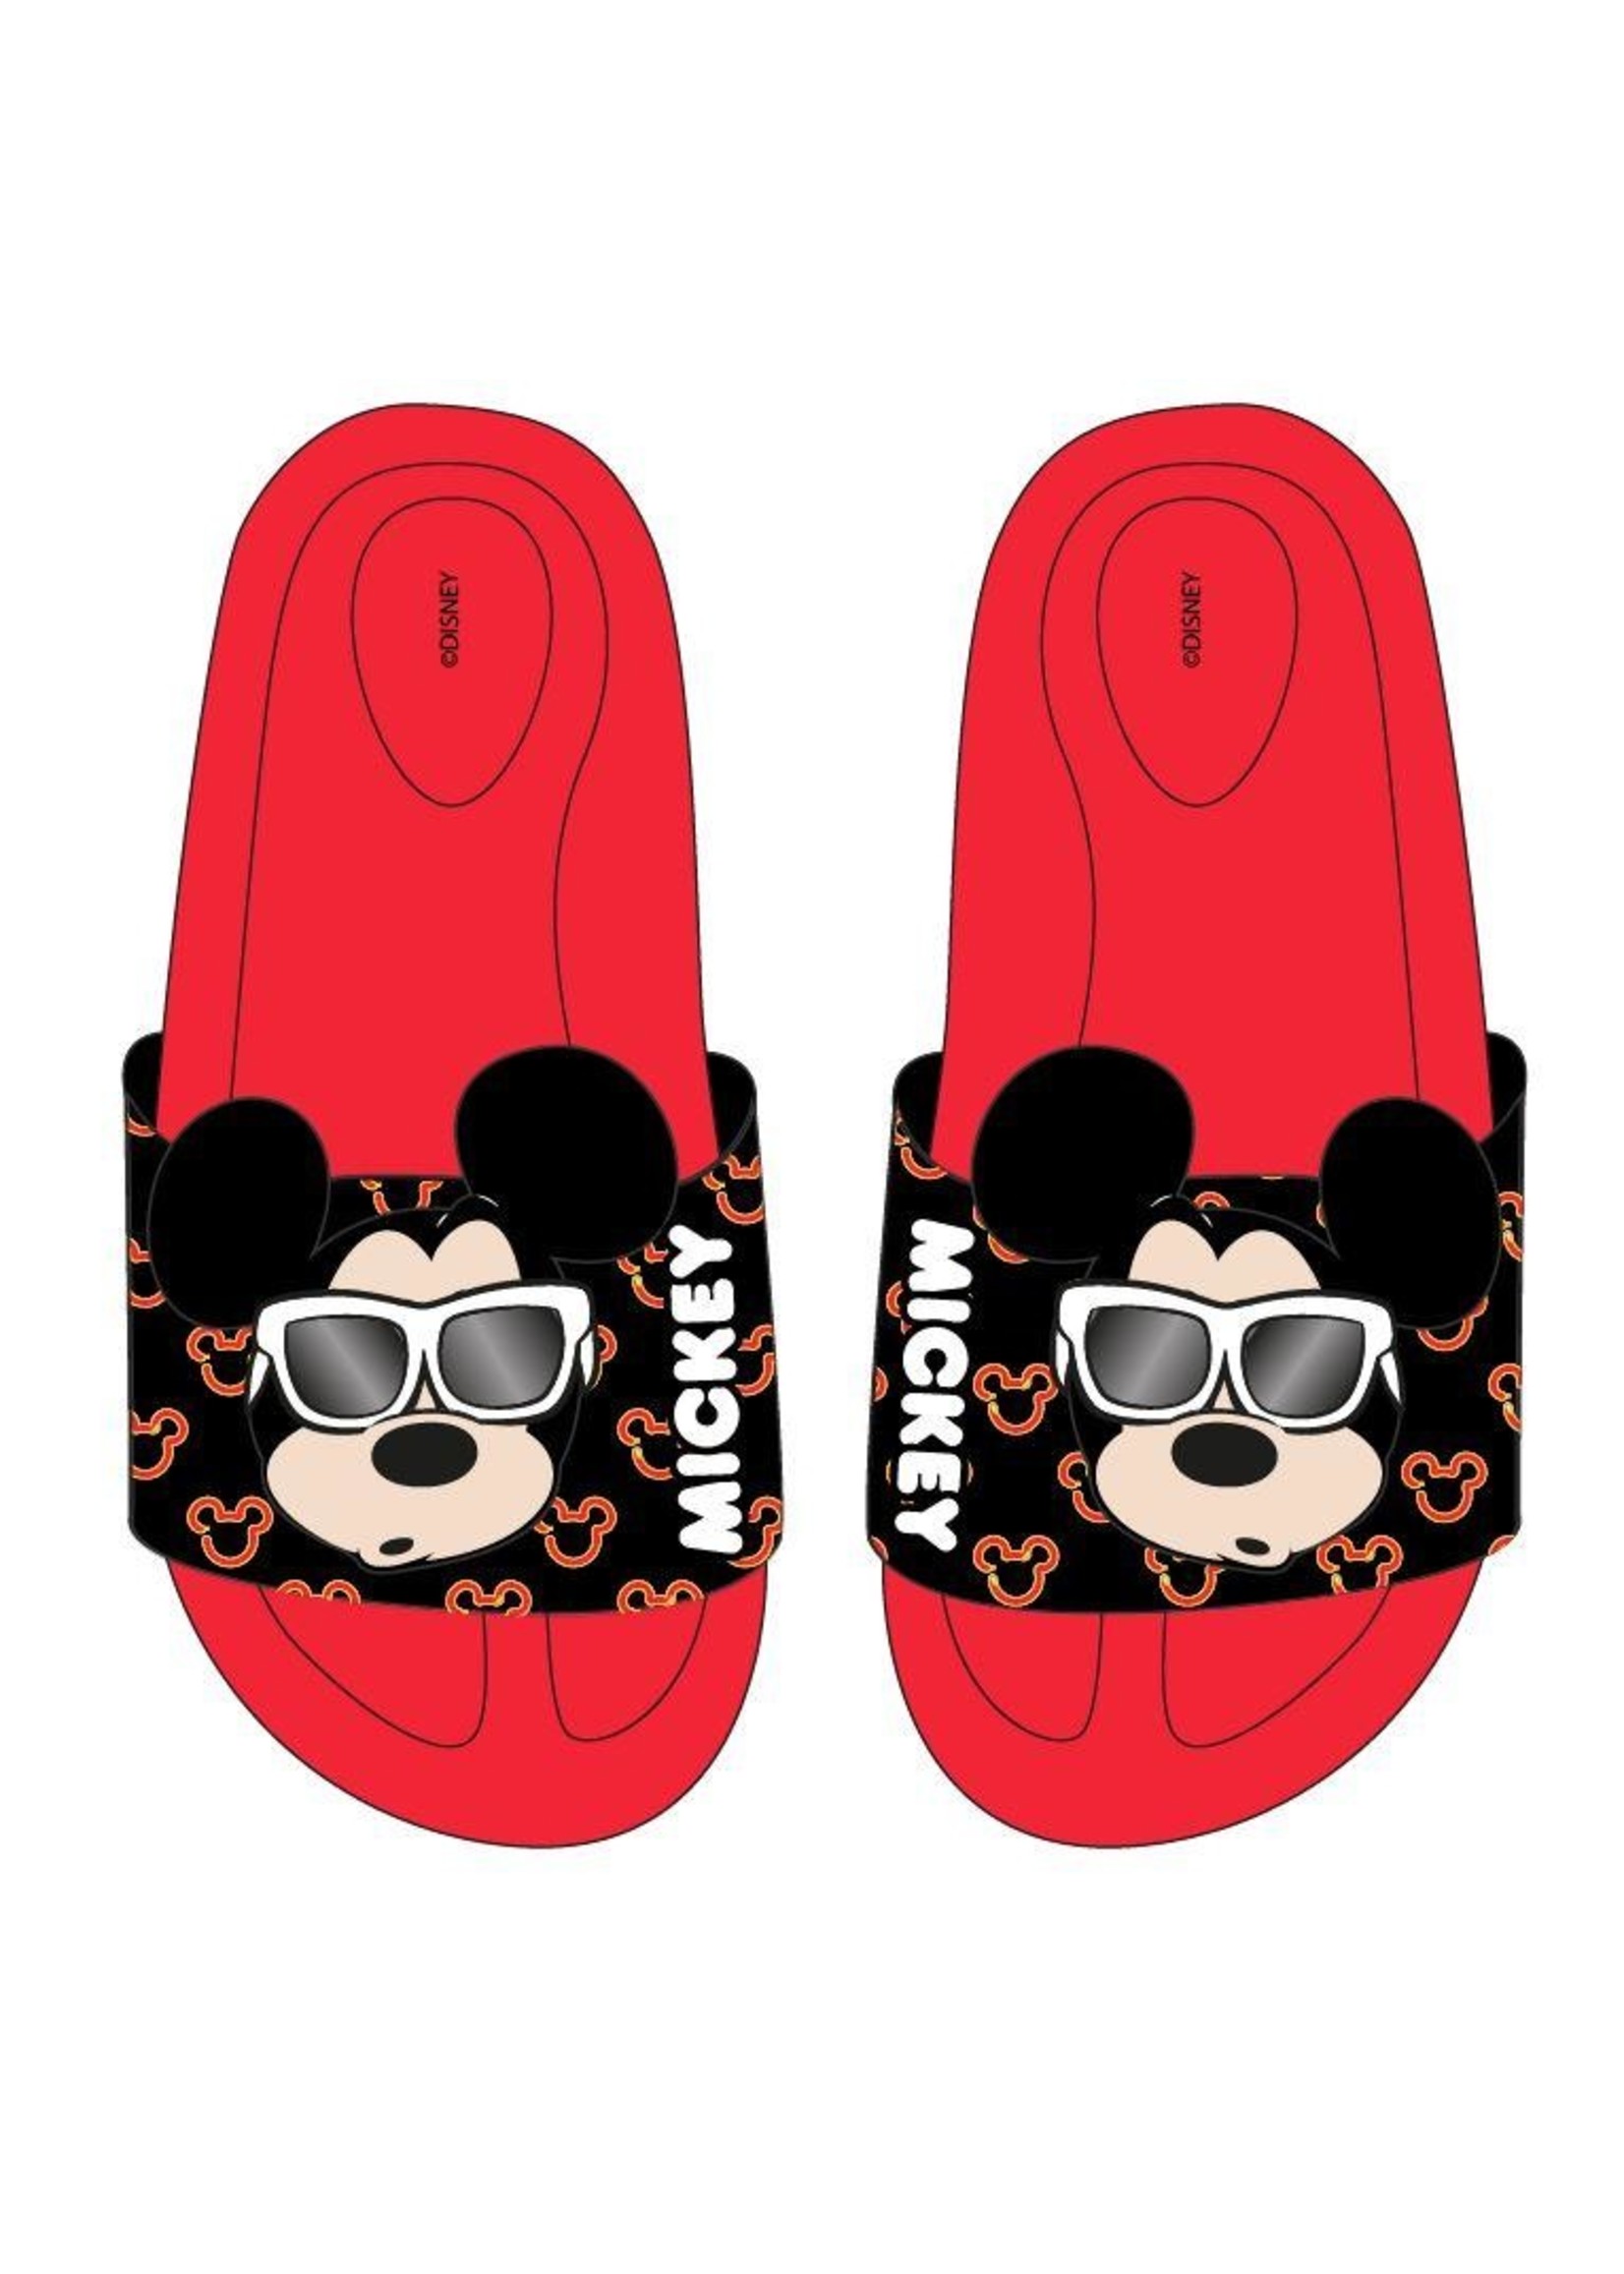 Disney Mickey Mouse bath slippers from Disney red